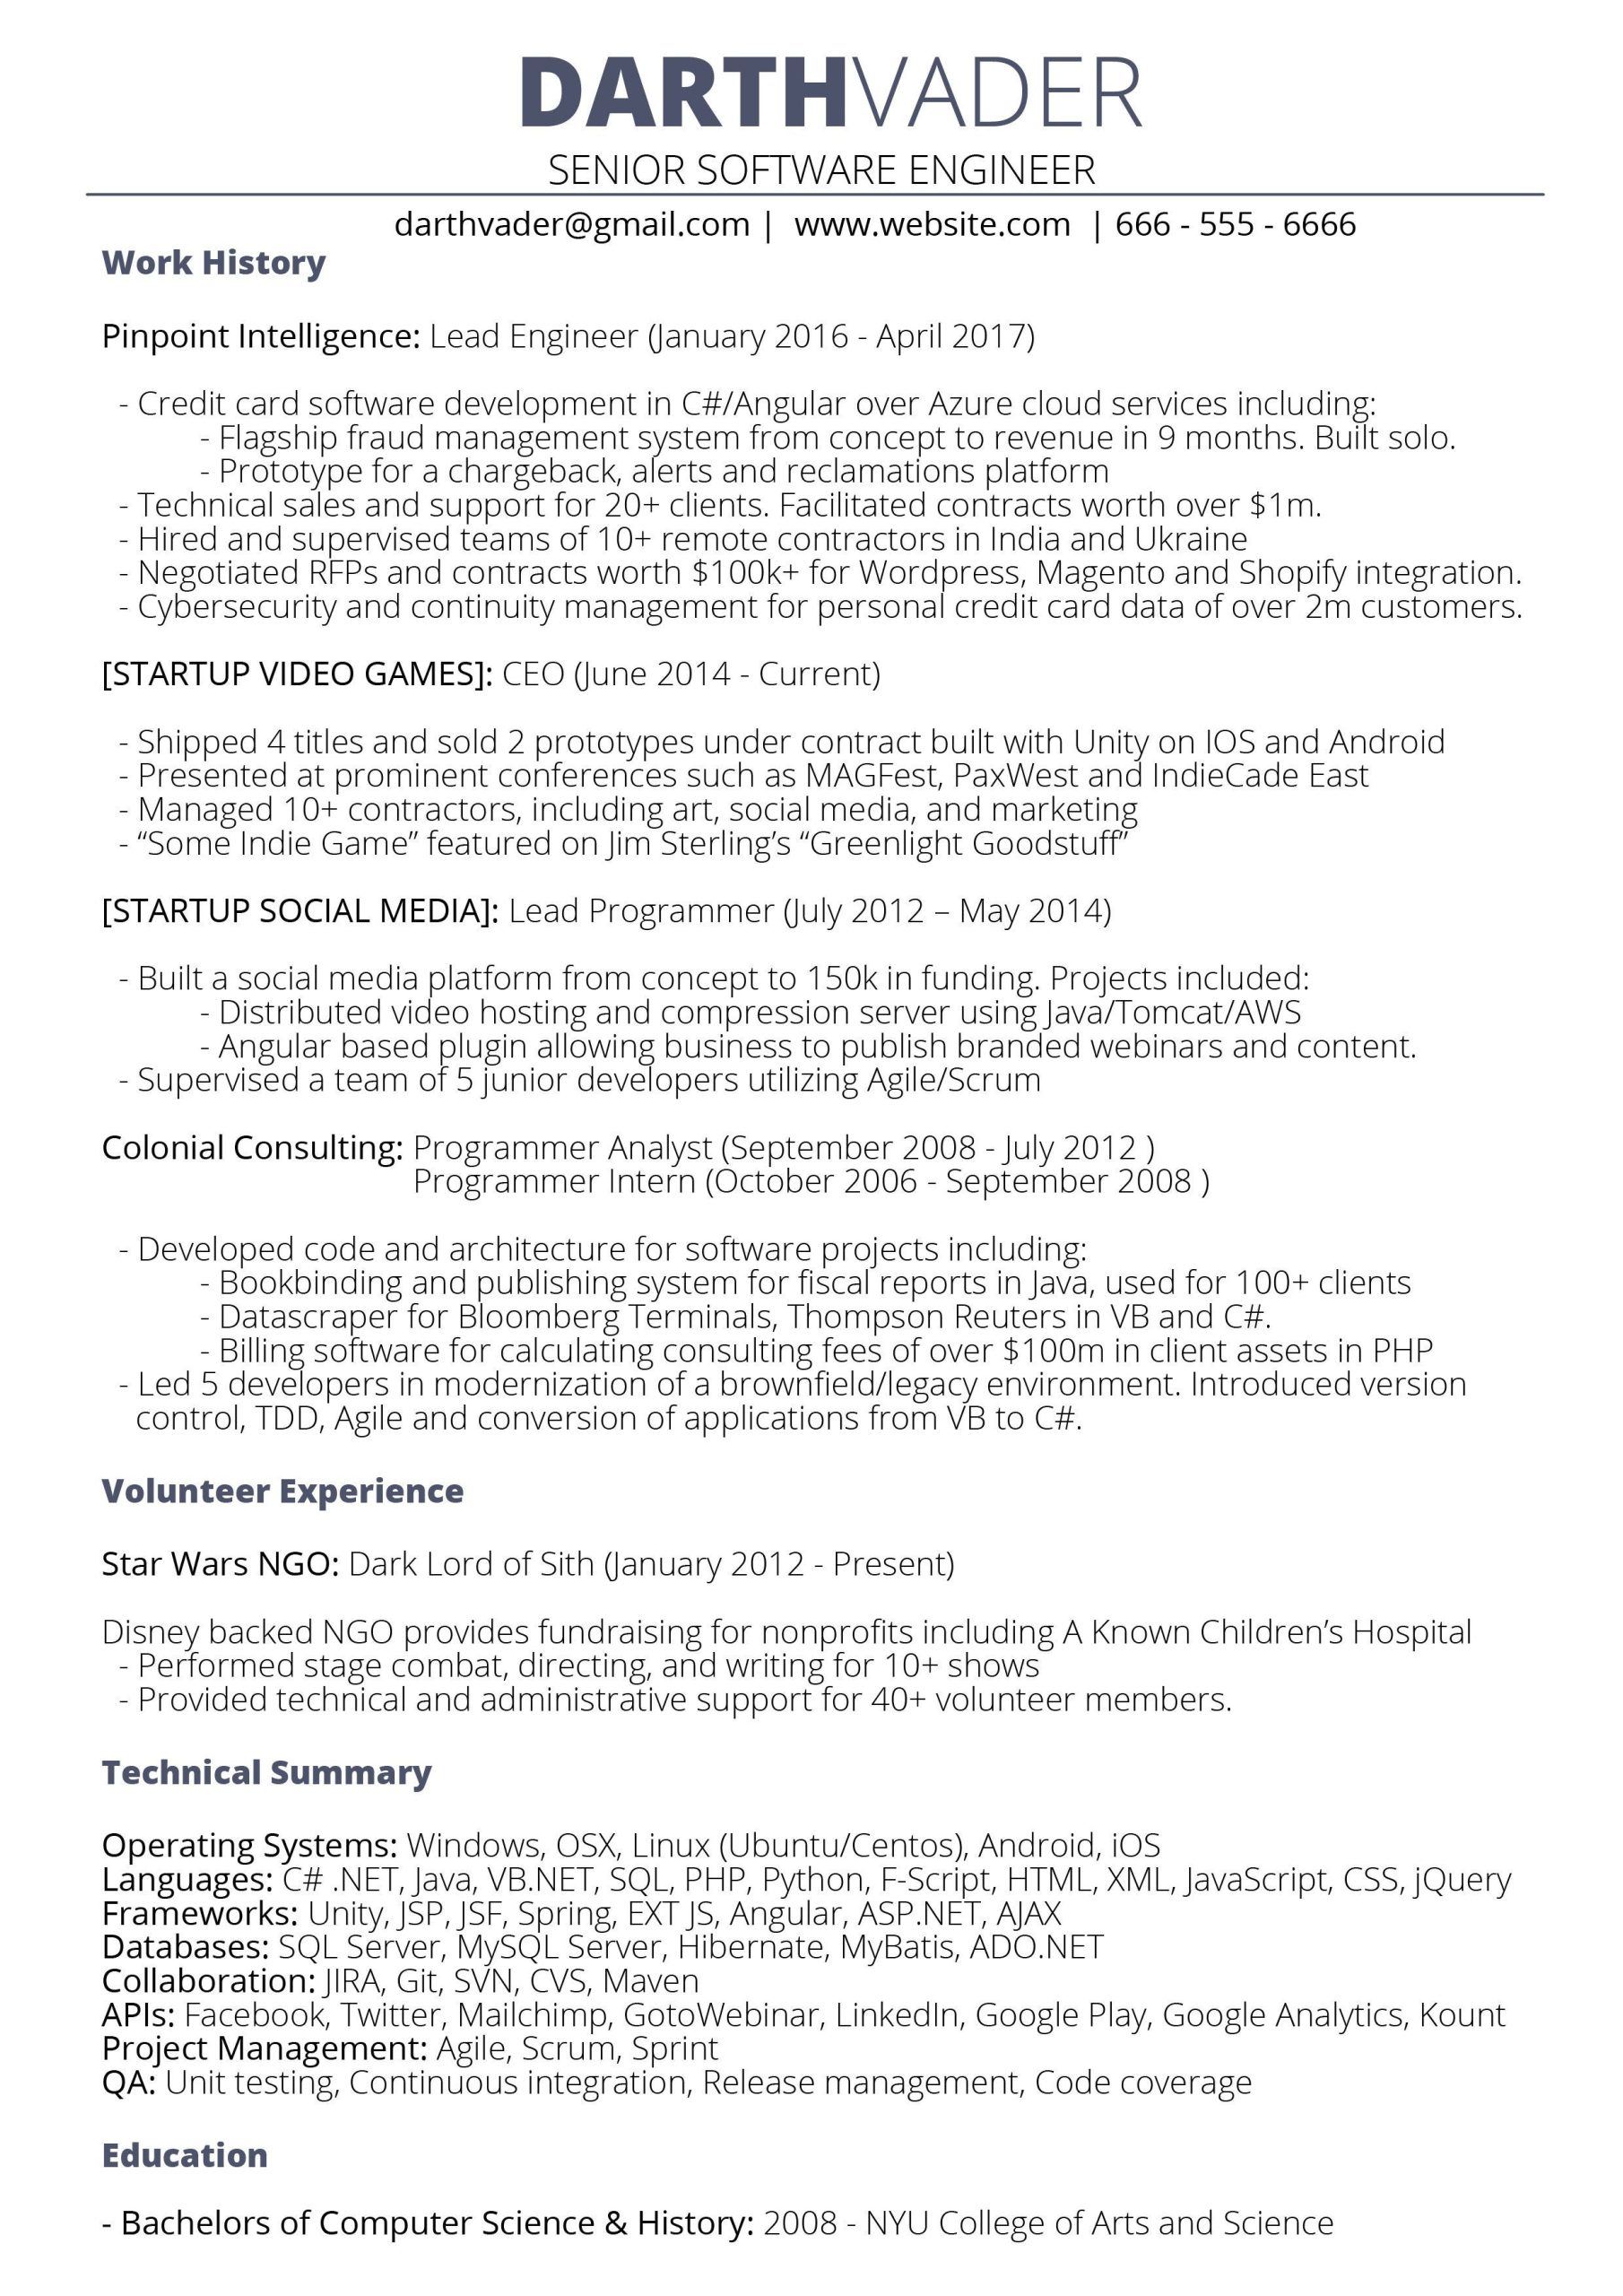 Kickresume Senior software Engineer Resume Sample with 15 Years Experience Senior software Engineer (10 Yrs) Looking for Critique : R/resumes